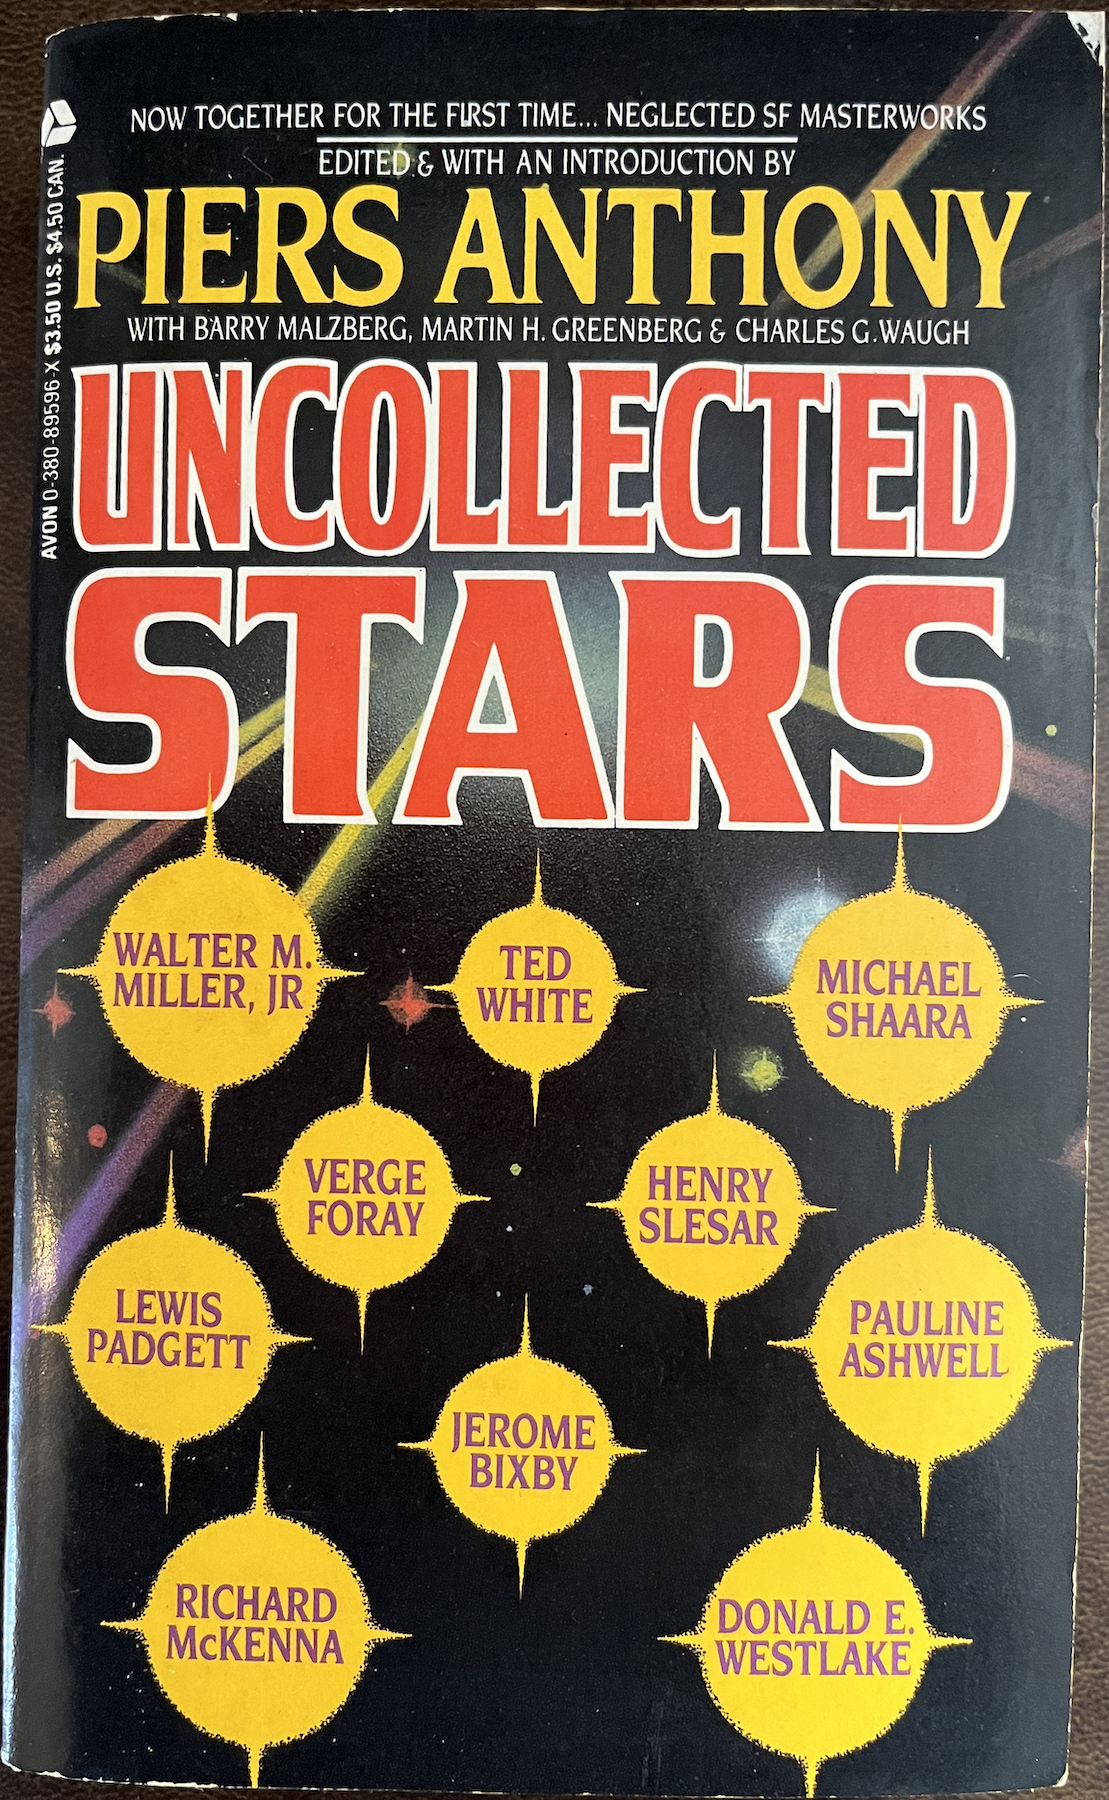 Uncollected Stars paperback cover